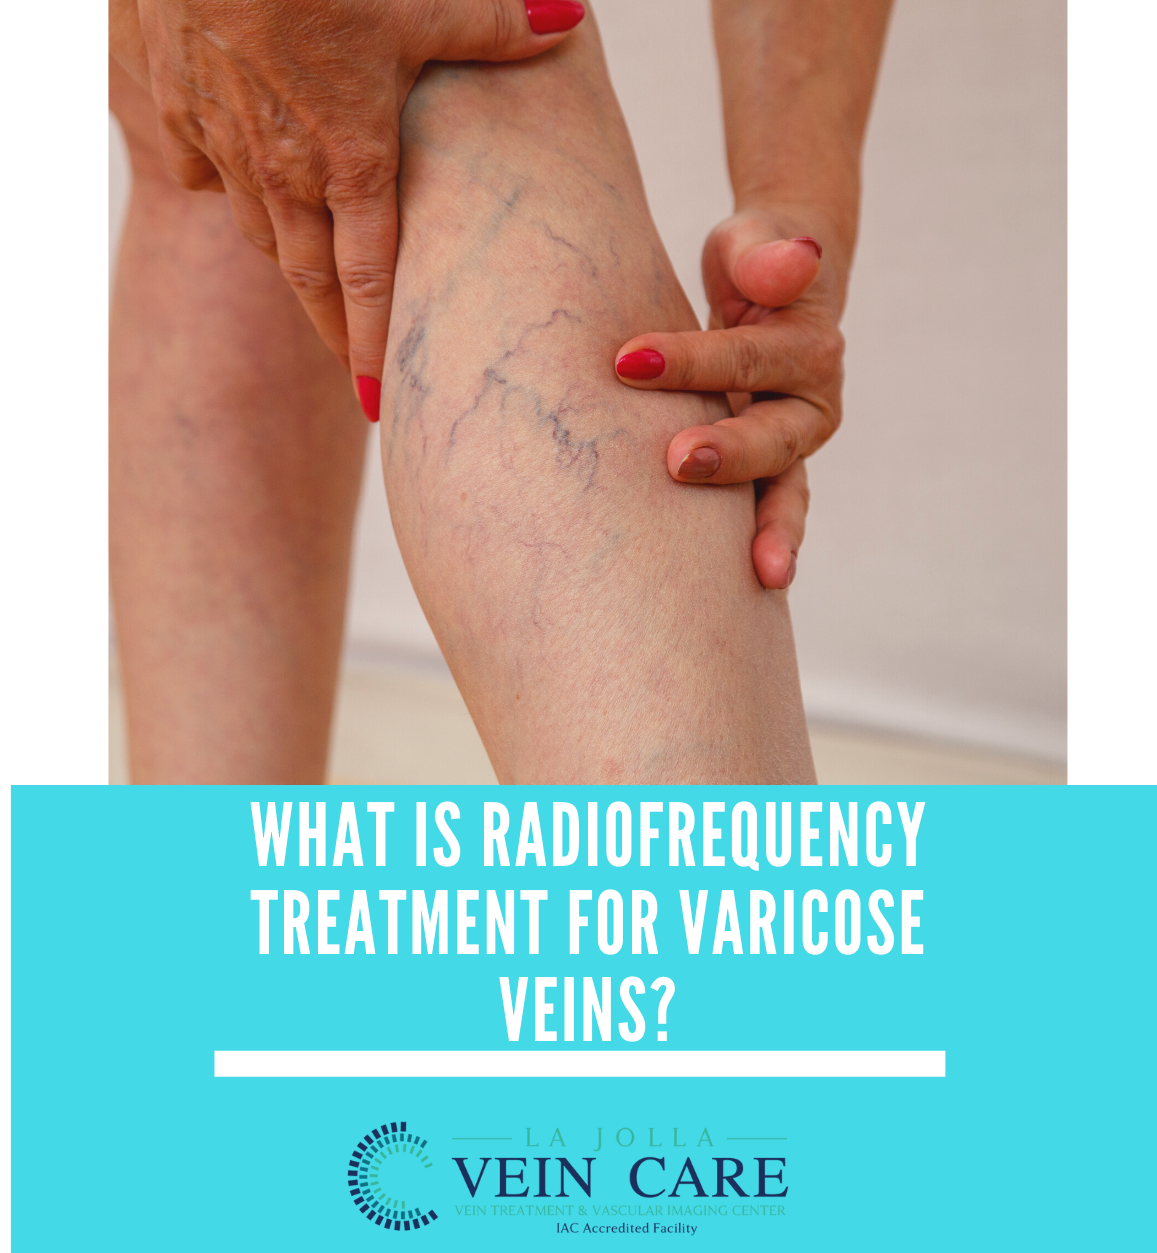 radiofrequencytreatment for varicose veins